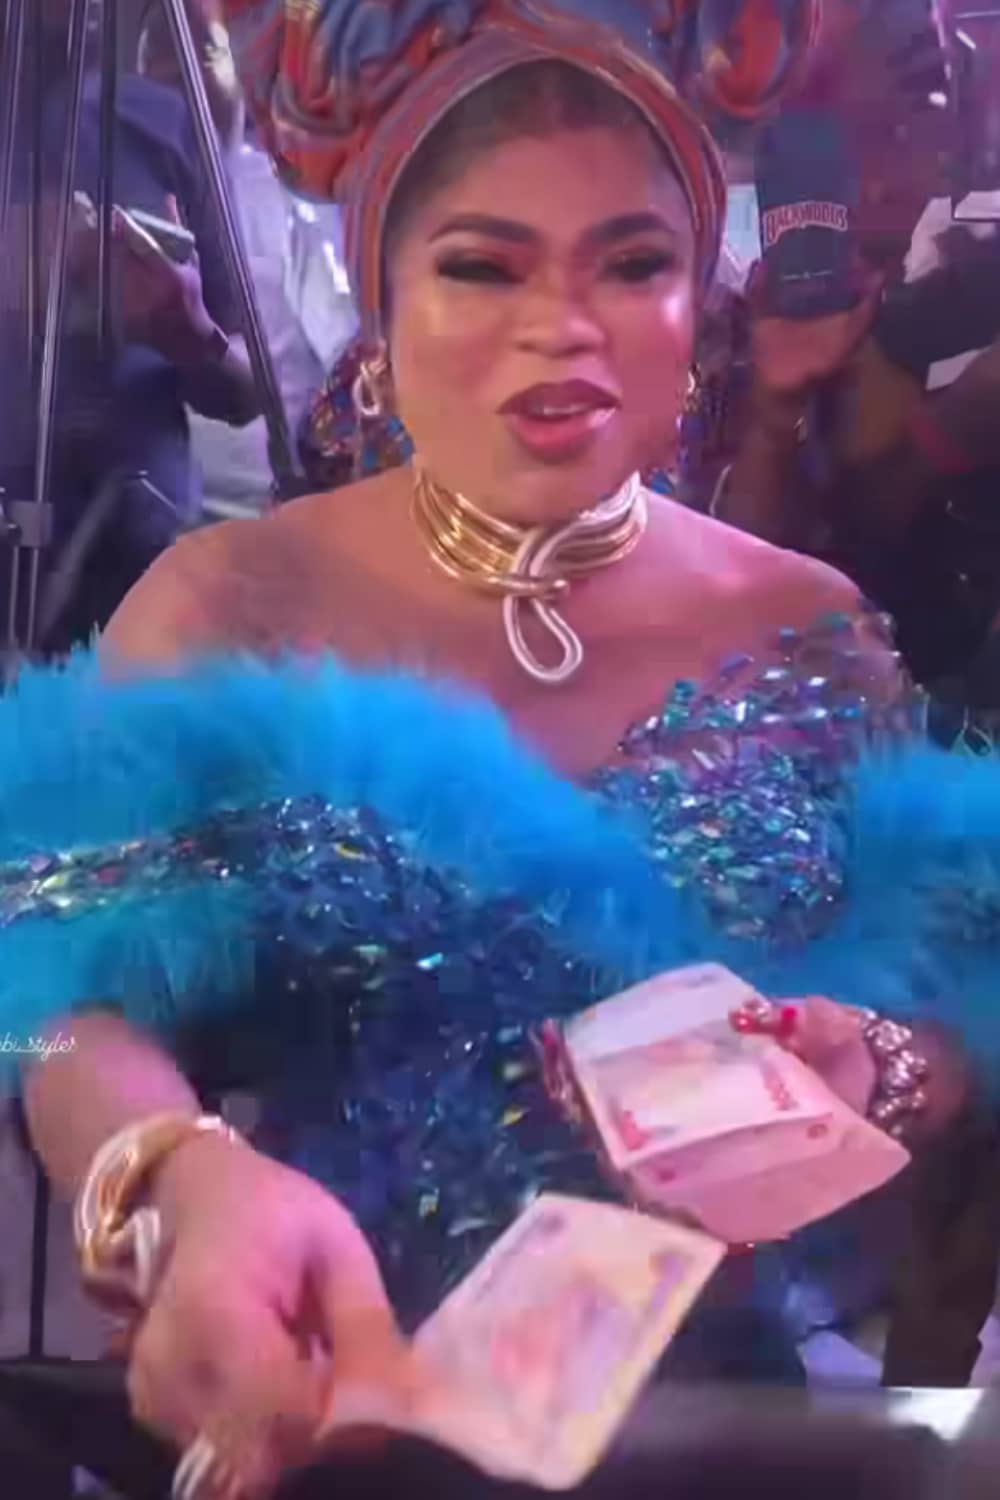 Bobrisky causes a stir as he makes N500 notes rain at party